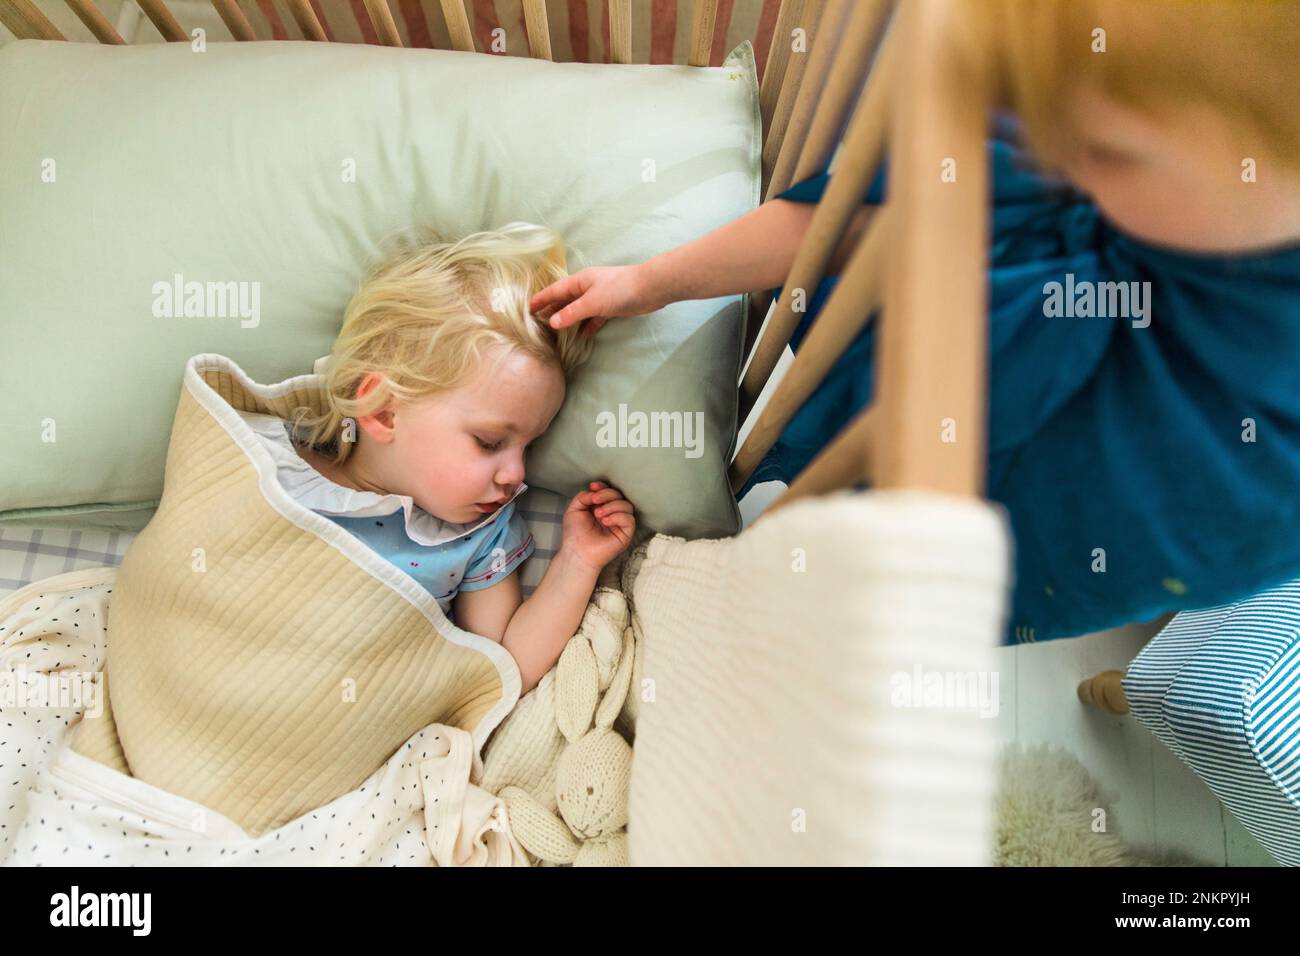 Young girl in cot with sibling stroking her hair Stock Photo